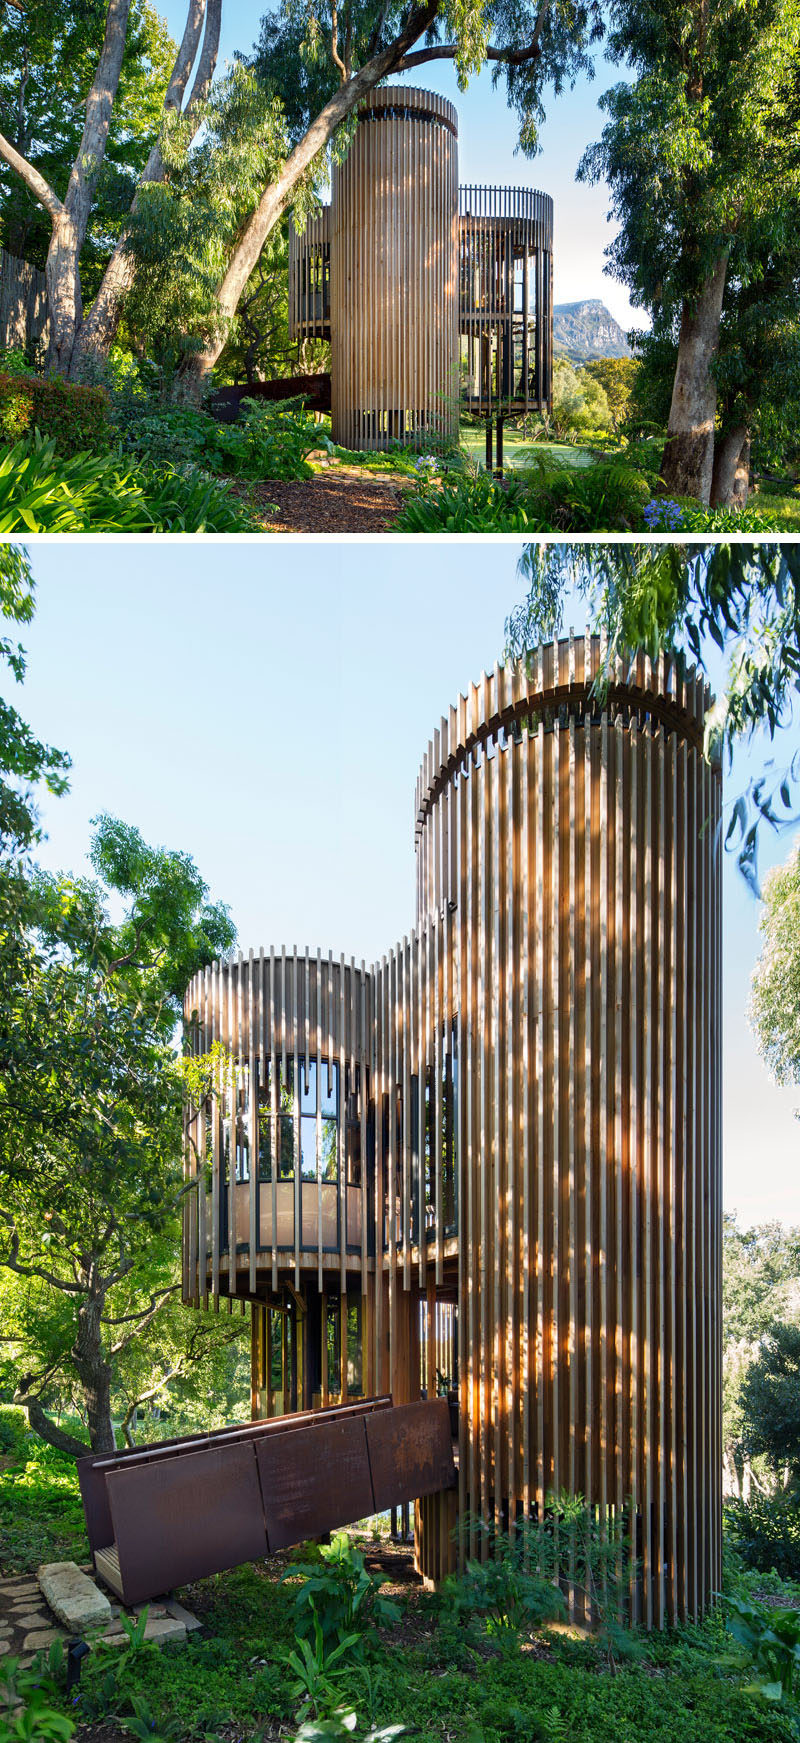 This small house makes use of vertical height, and has been arranged around the geometry of a square with four surrounding circles, creating a pin-wheel plan layout.